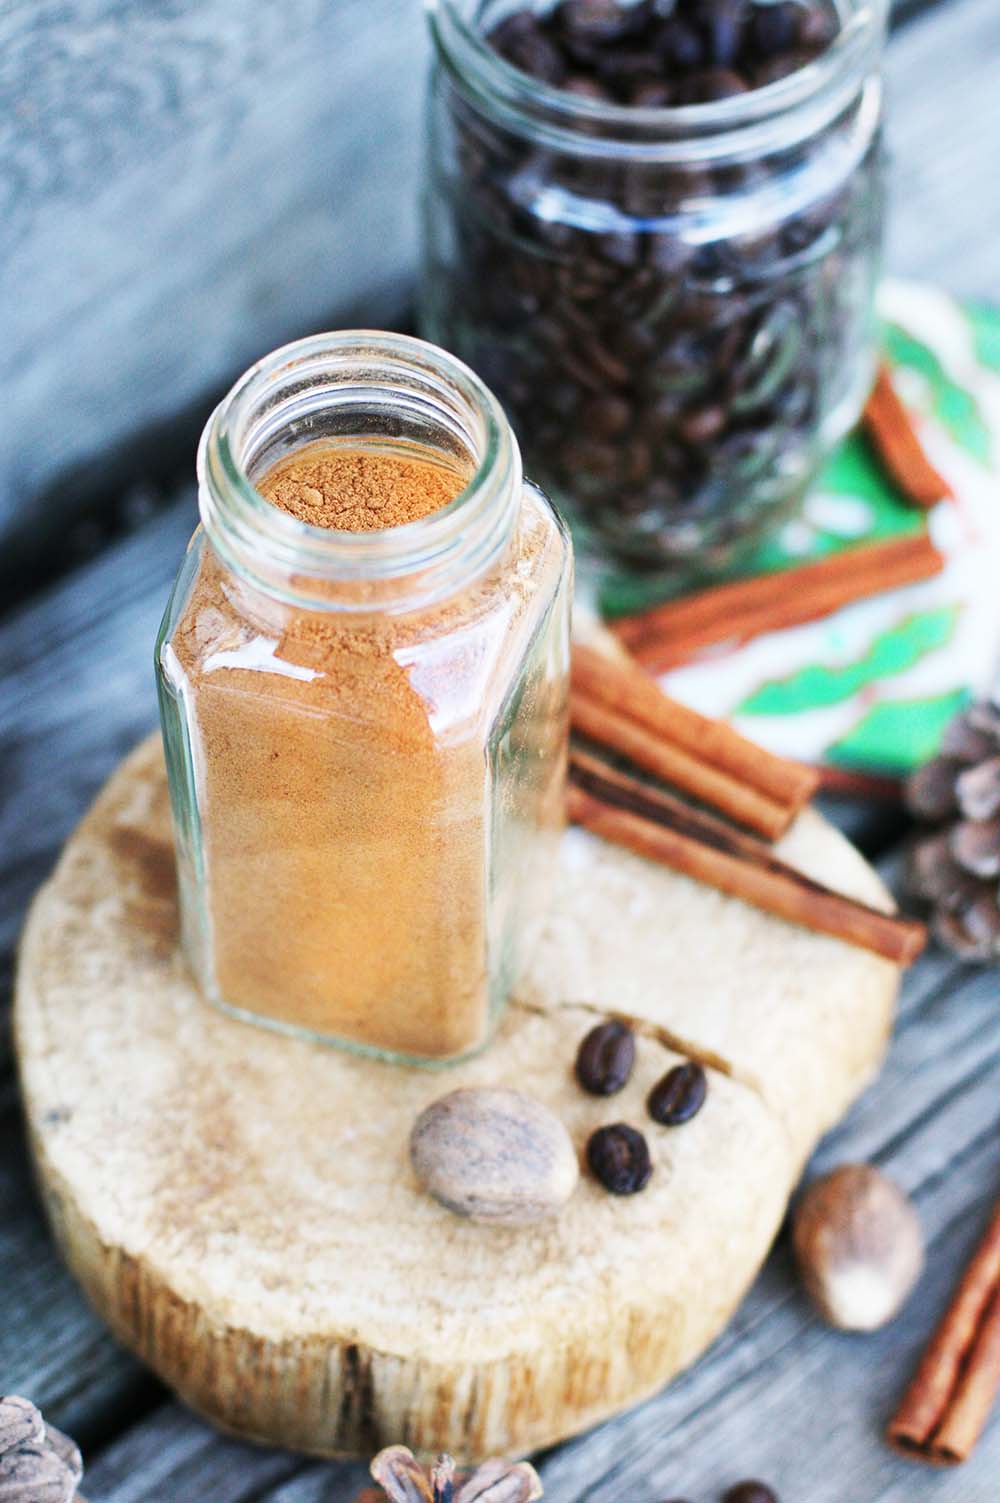 DIY coffee spices: The perfect gift for the coffee lover. Spice blend for your coffee.